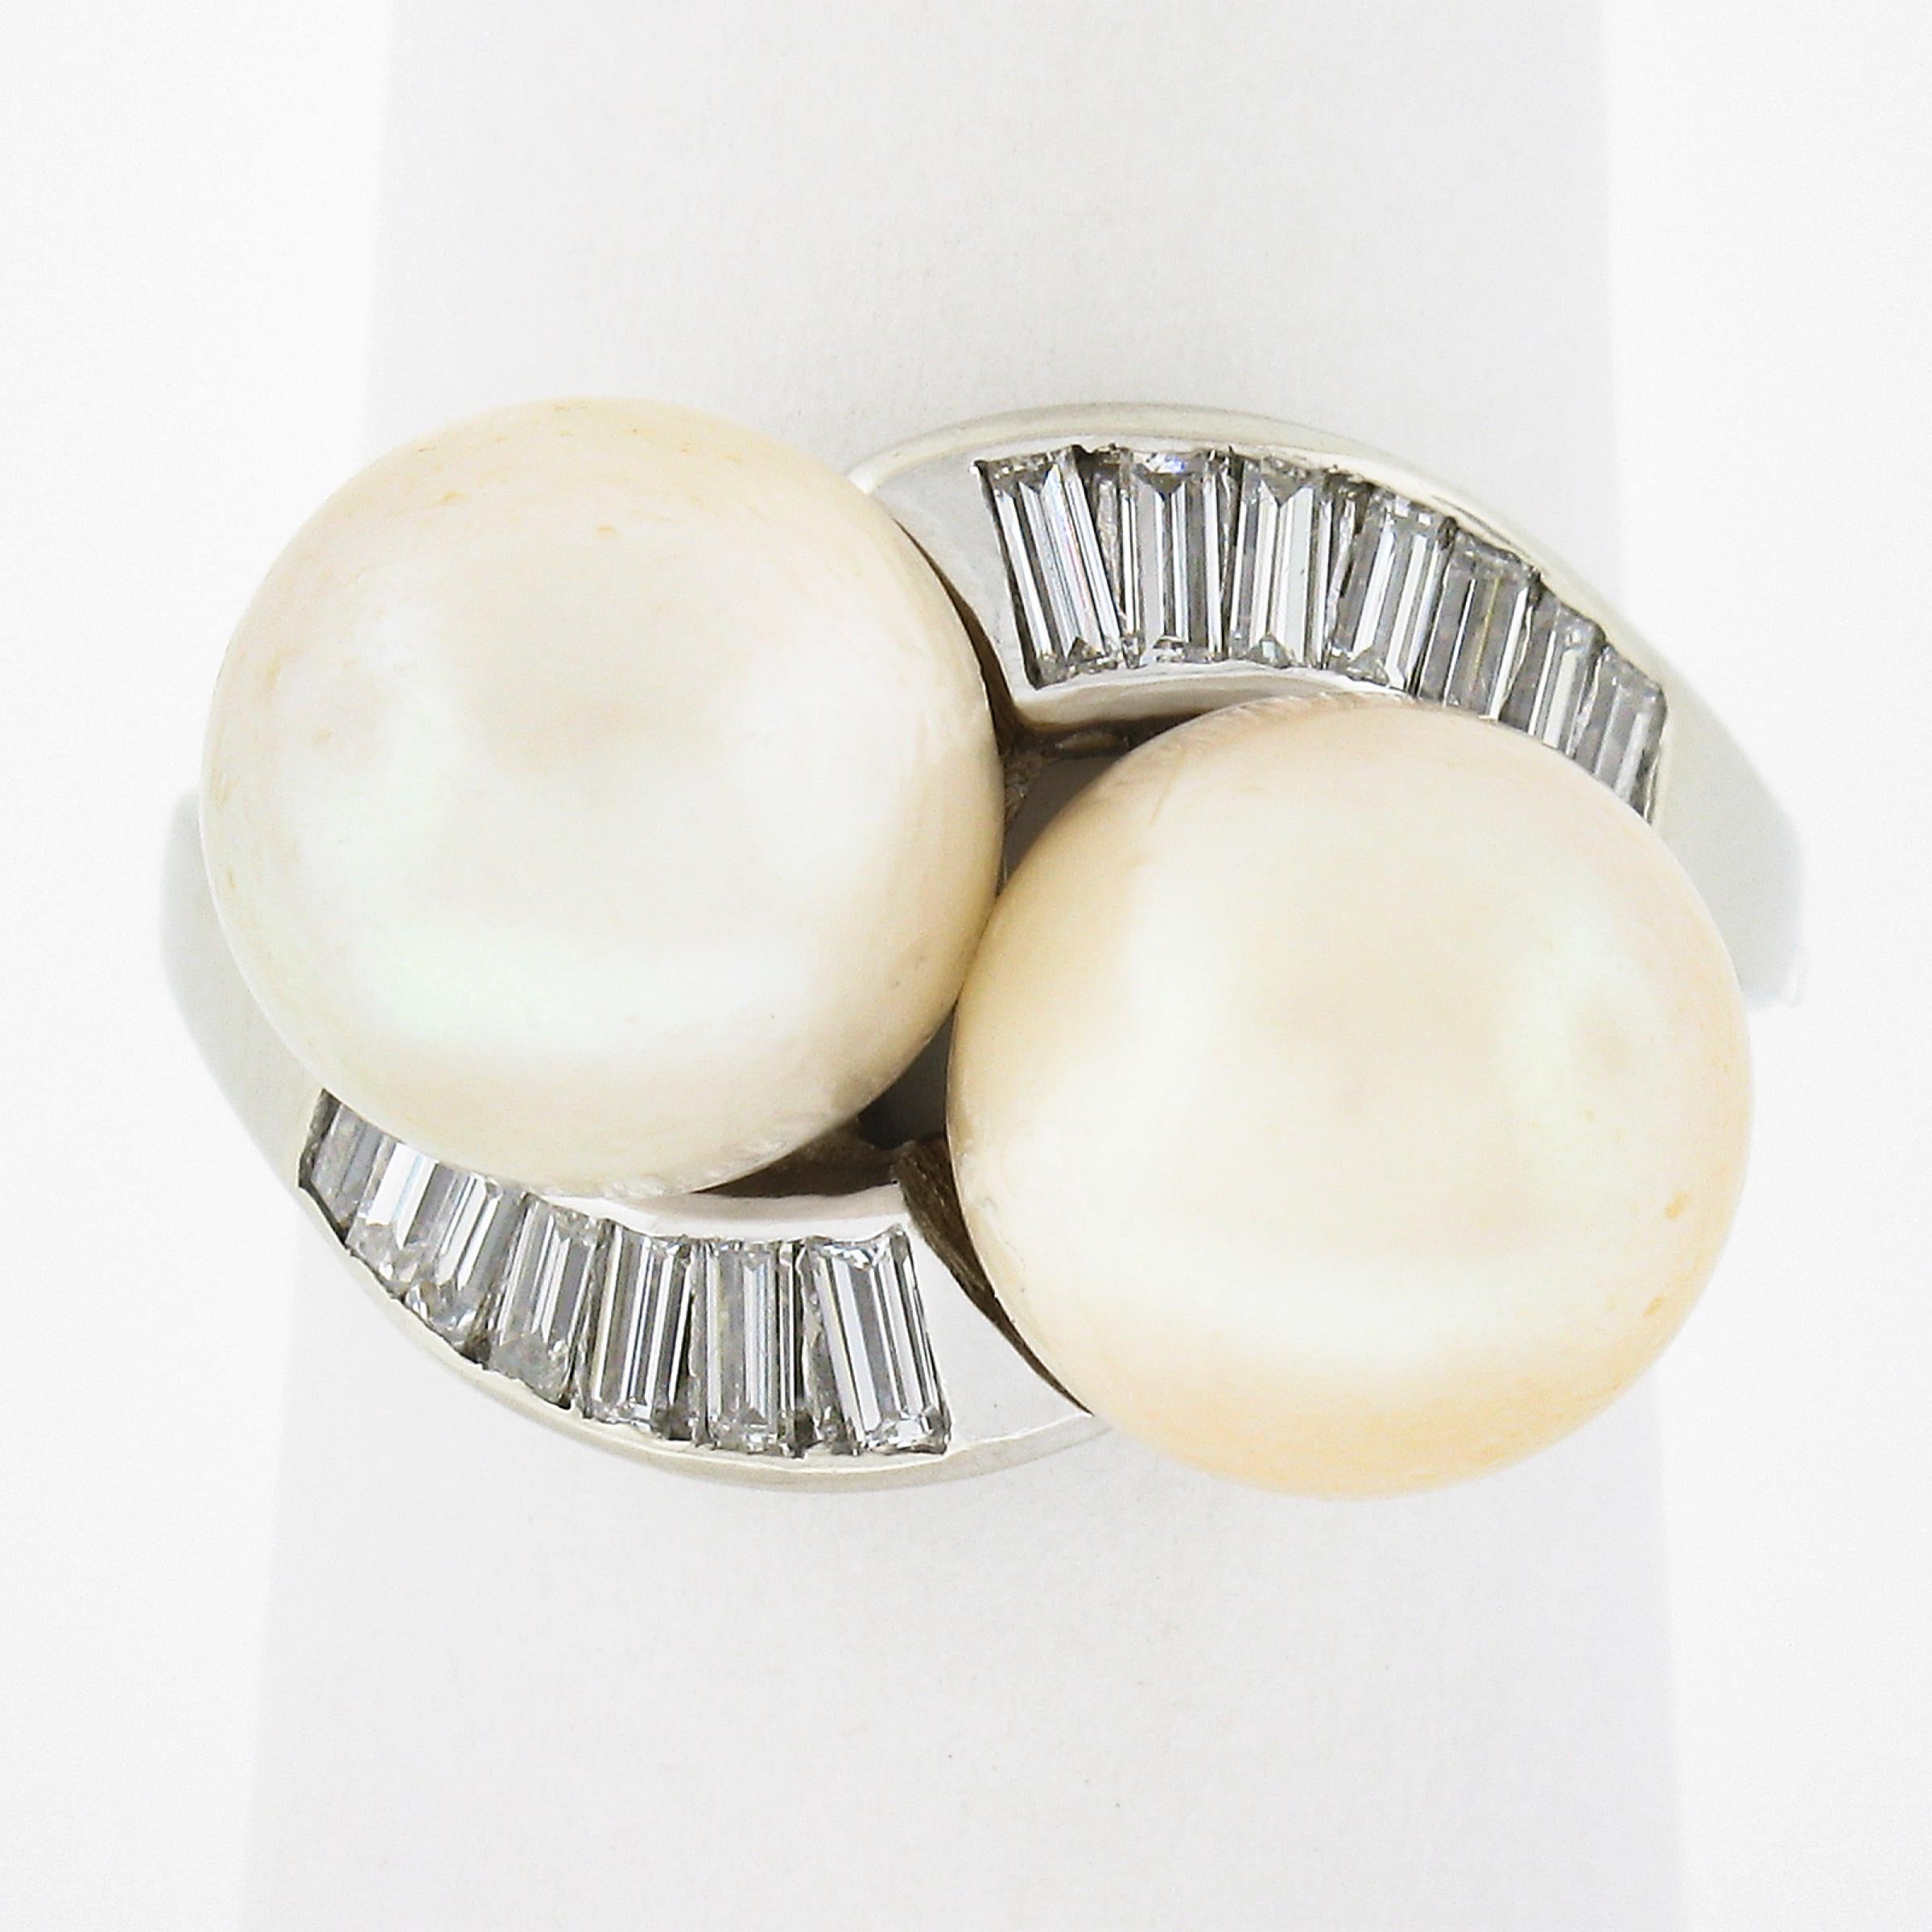 This magnificent vintage cocktail ring is crafted in solid 14k white gold and features an elegant bypass design that carries two, GIA certified button shape cultured saltwater pearls with light cream body color and pink overtone. The bypass design